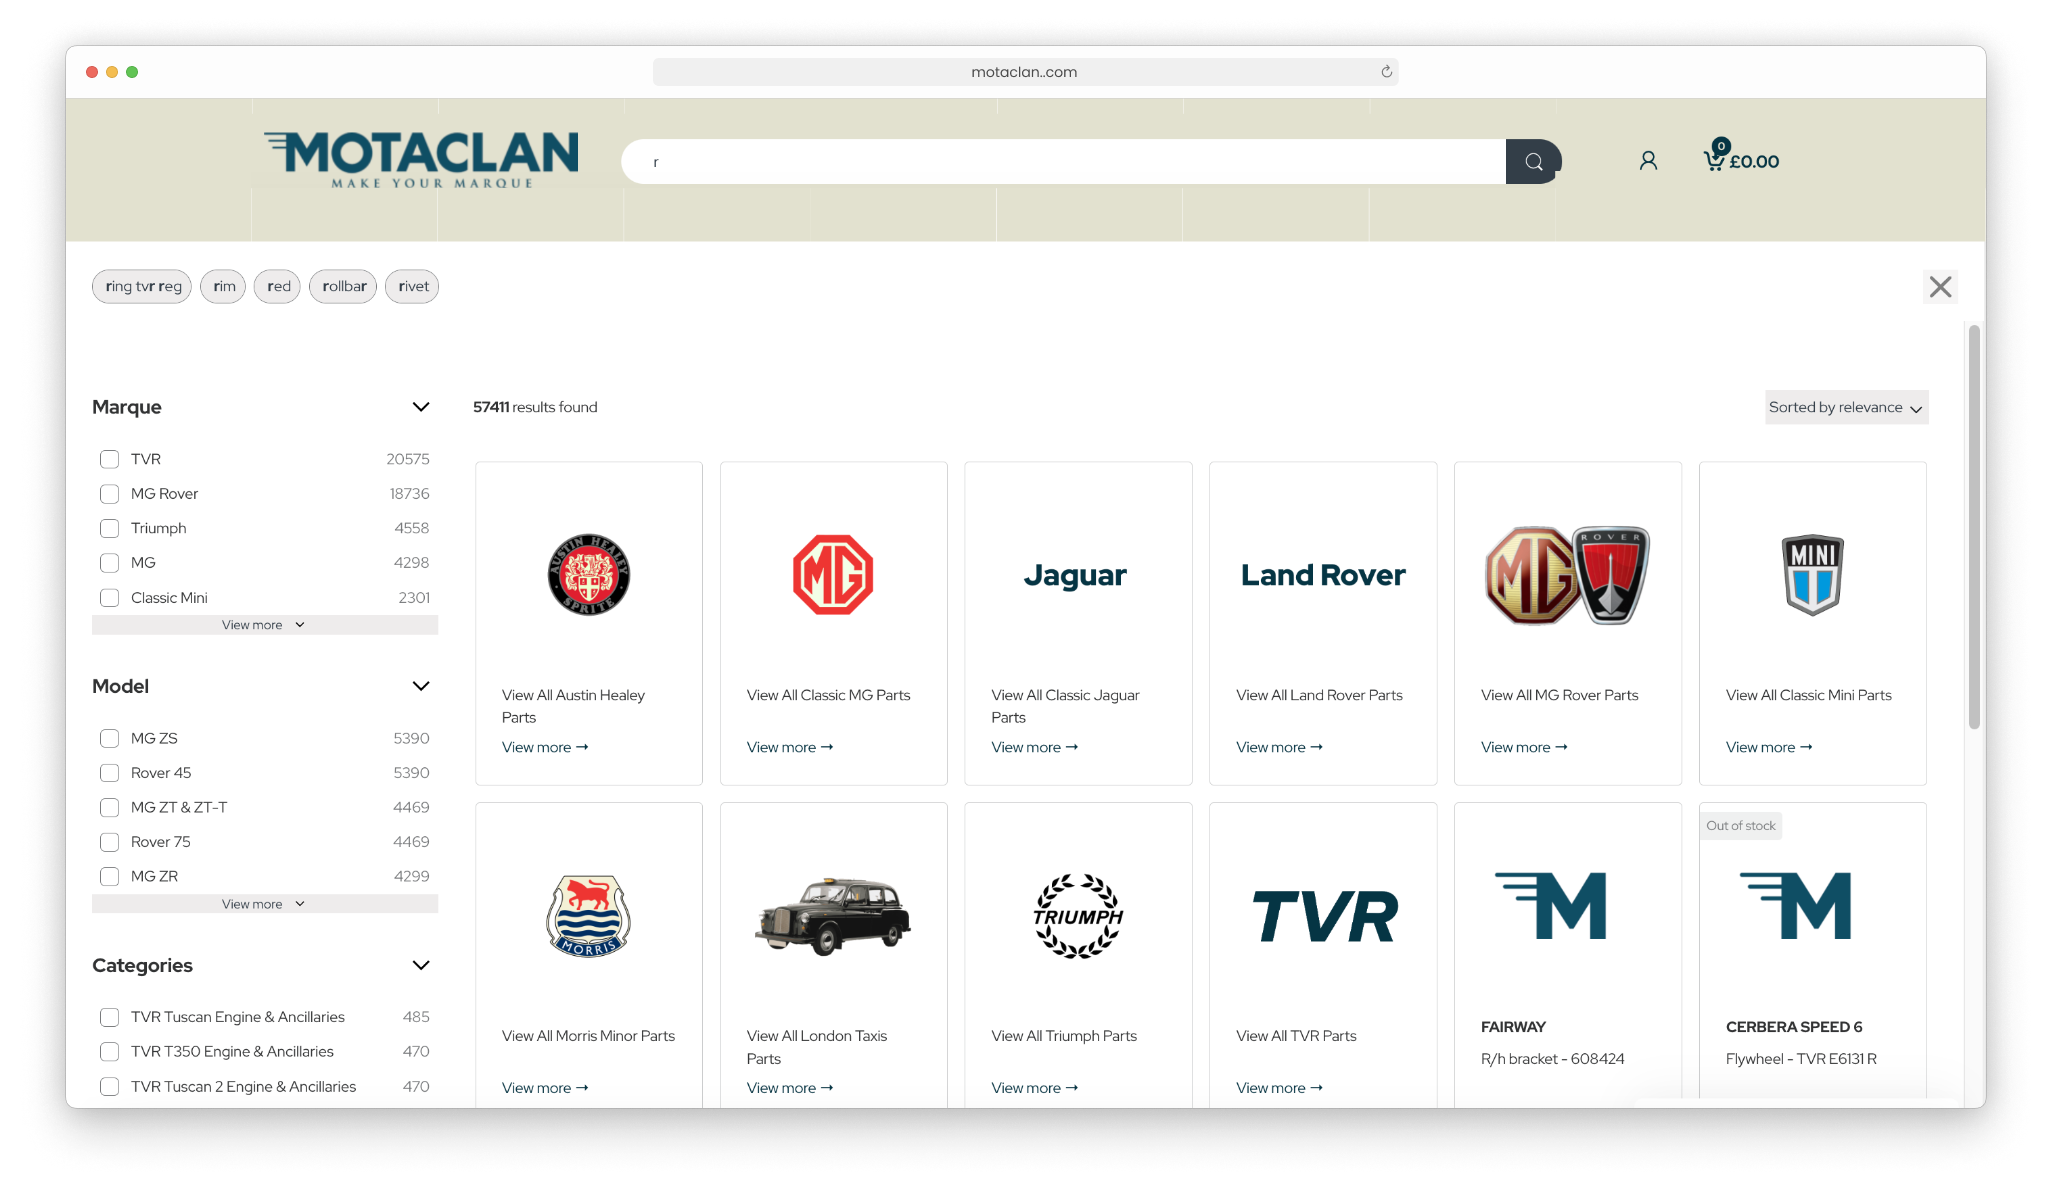 Motaclan's Advanced Search with Doofinder, as implemented by eCommerce development agency, magic42